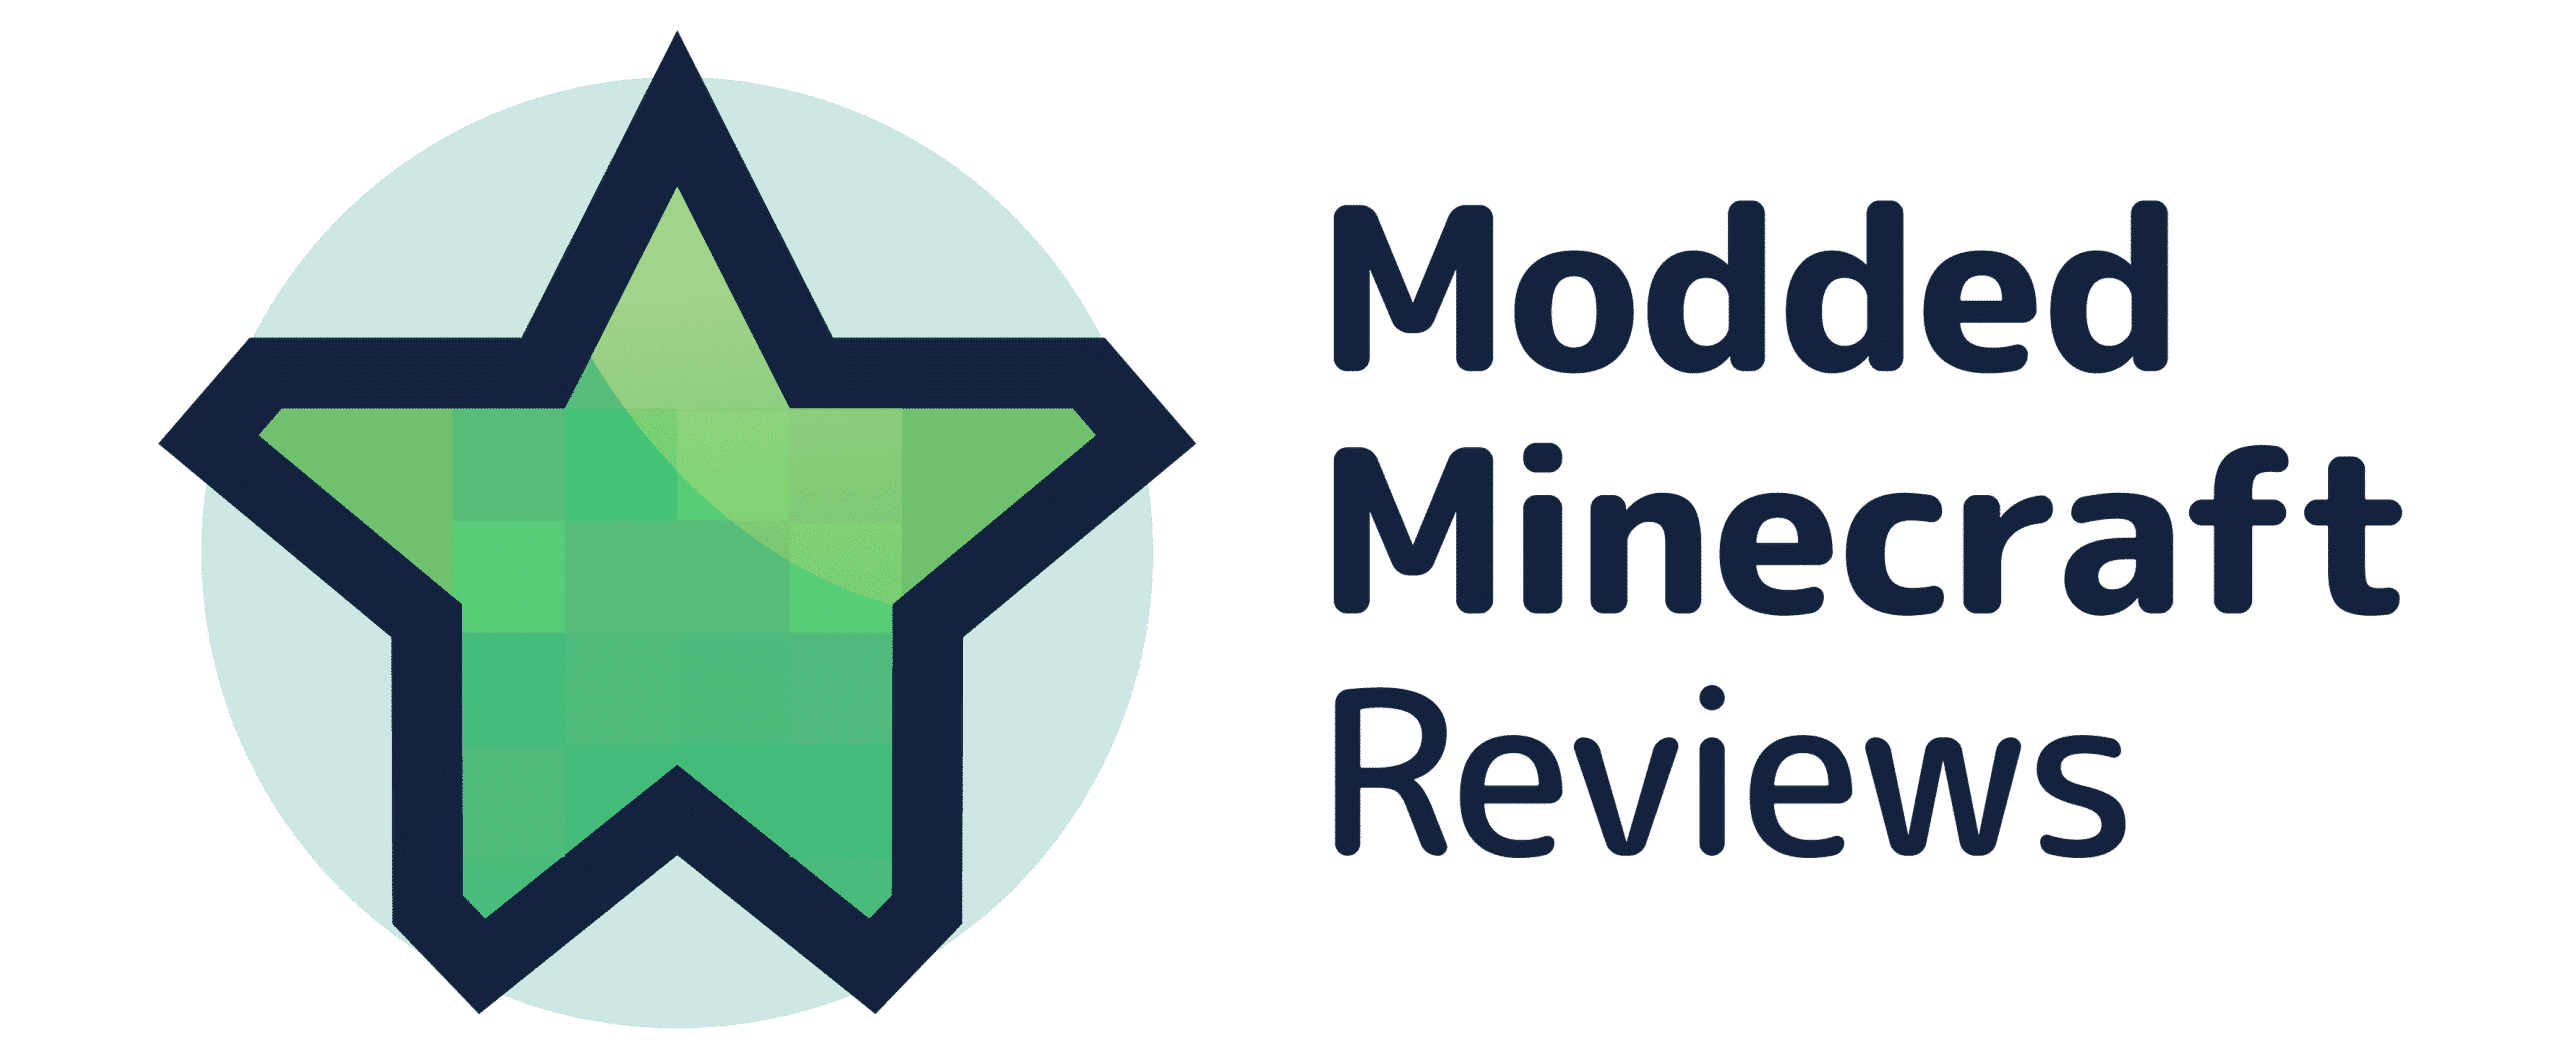 Minecraft review